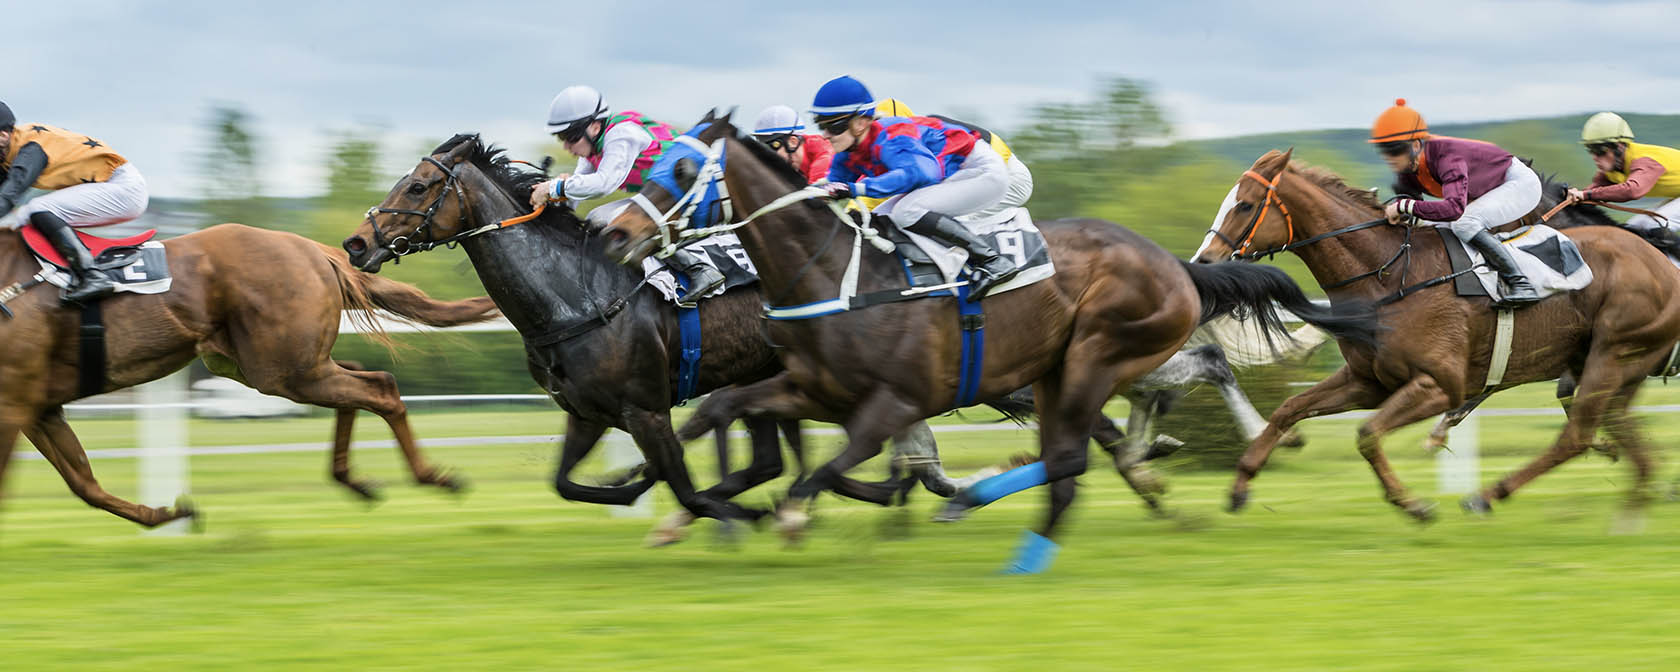 Breaking: New anti-doping program is good news for racehorses